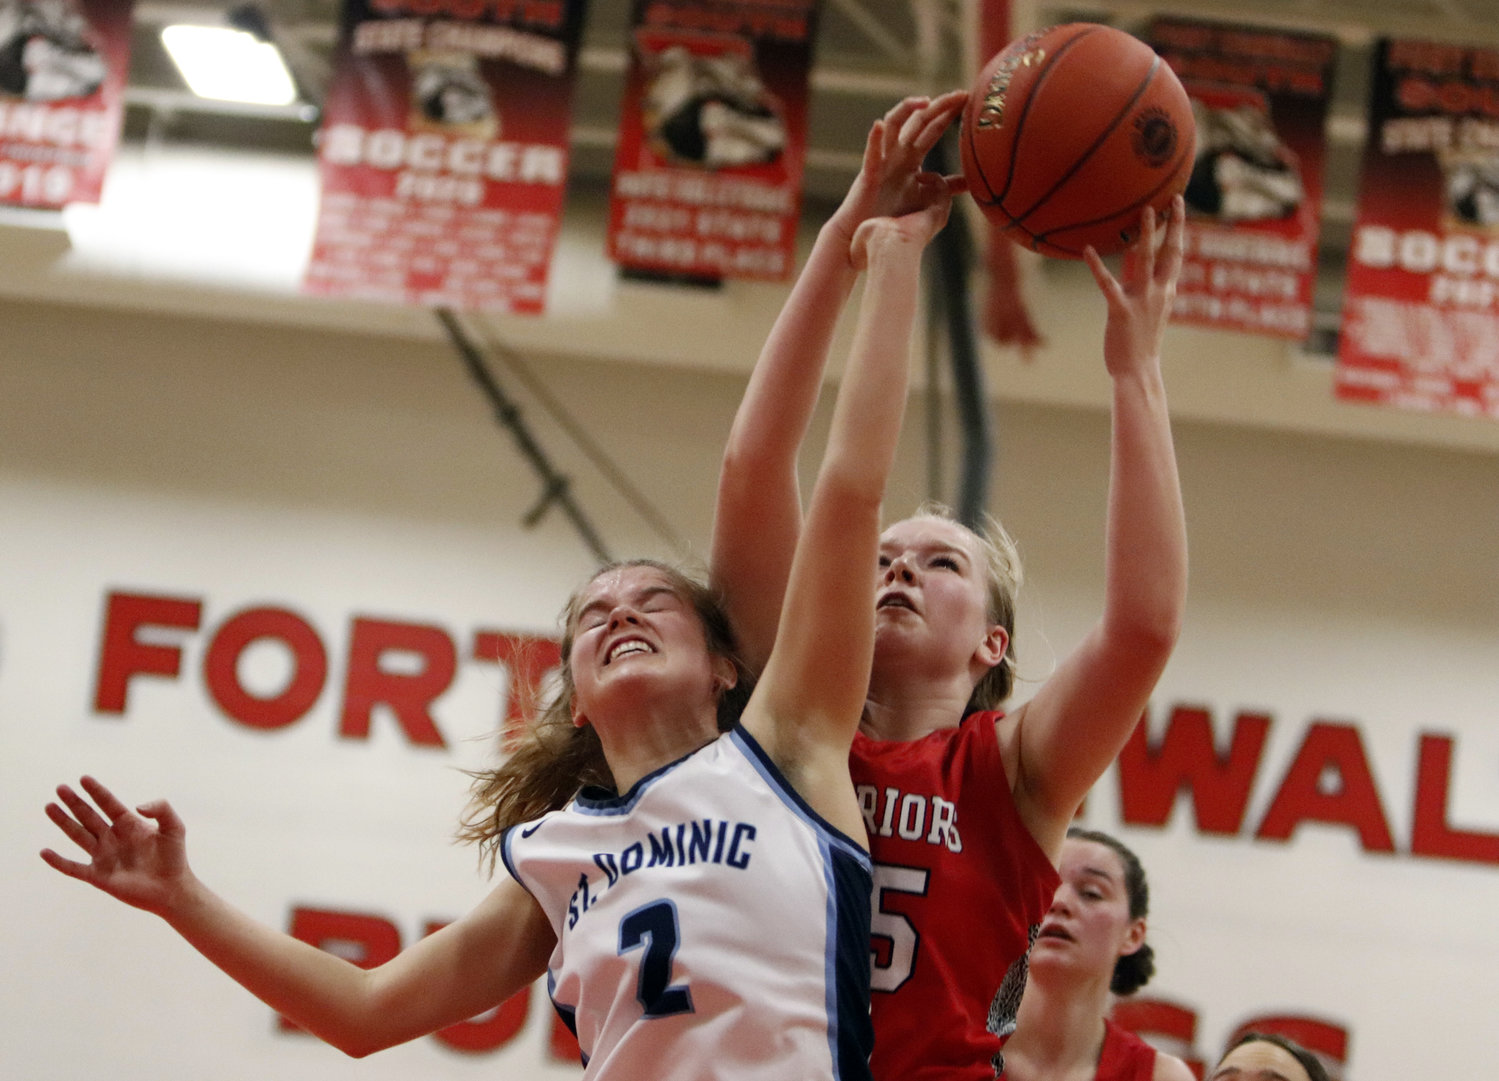 Warrenton junior Sophi Meuller (right) brings down a rebound over St. Dominic guard Anna Burcham during the first half of last week’s district quarterfinal matchup at Ft. Zumwalt South High School.